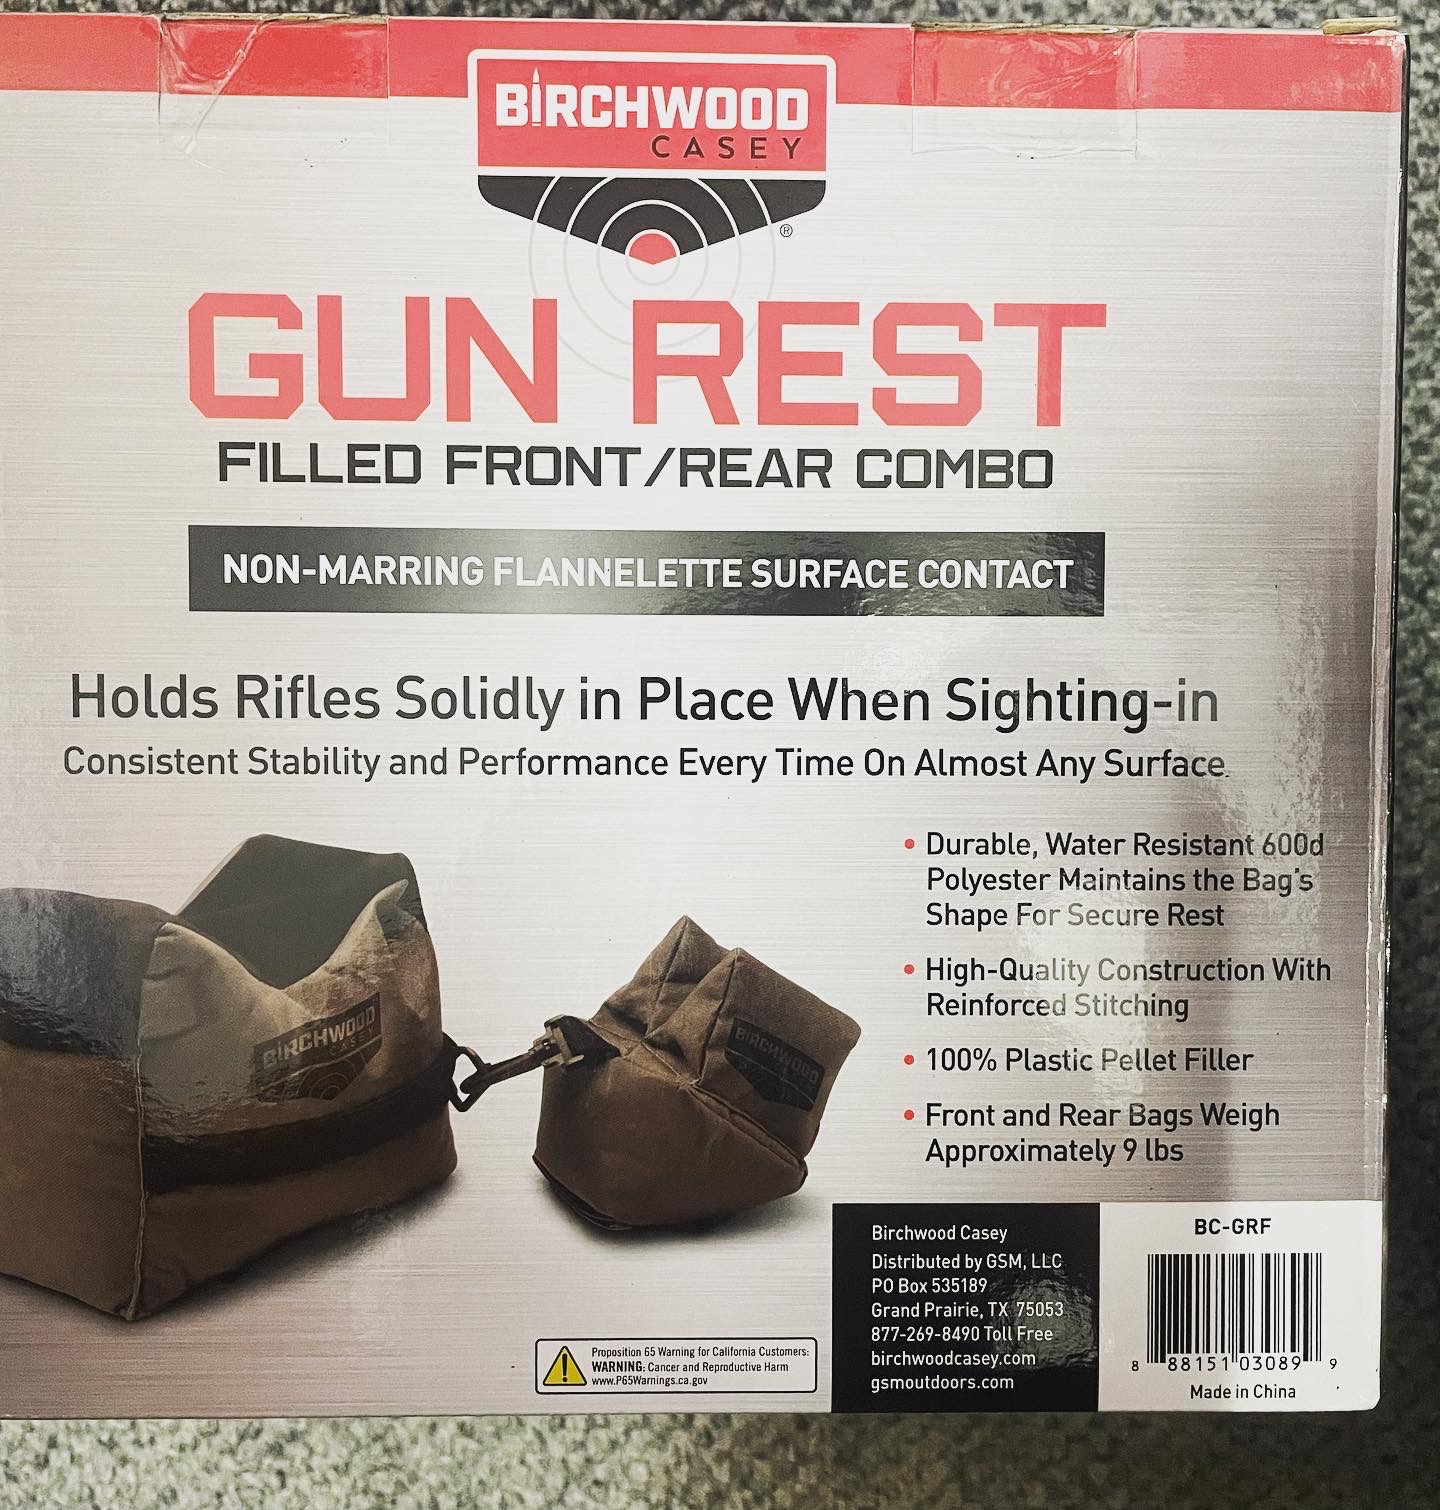 Gun Rest bags front and rear filled Birchwood Casey